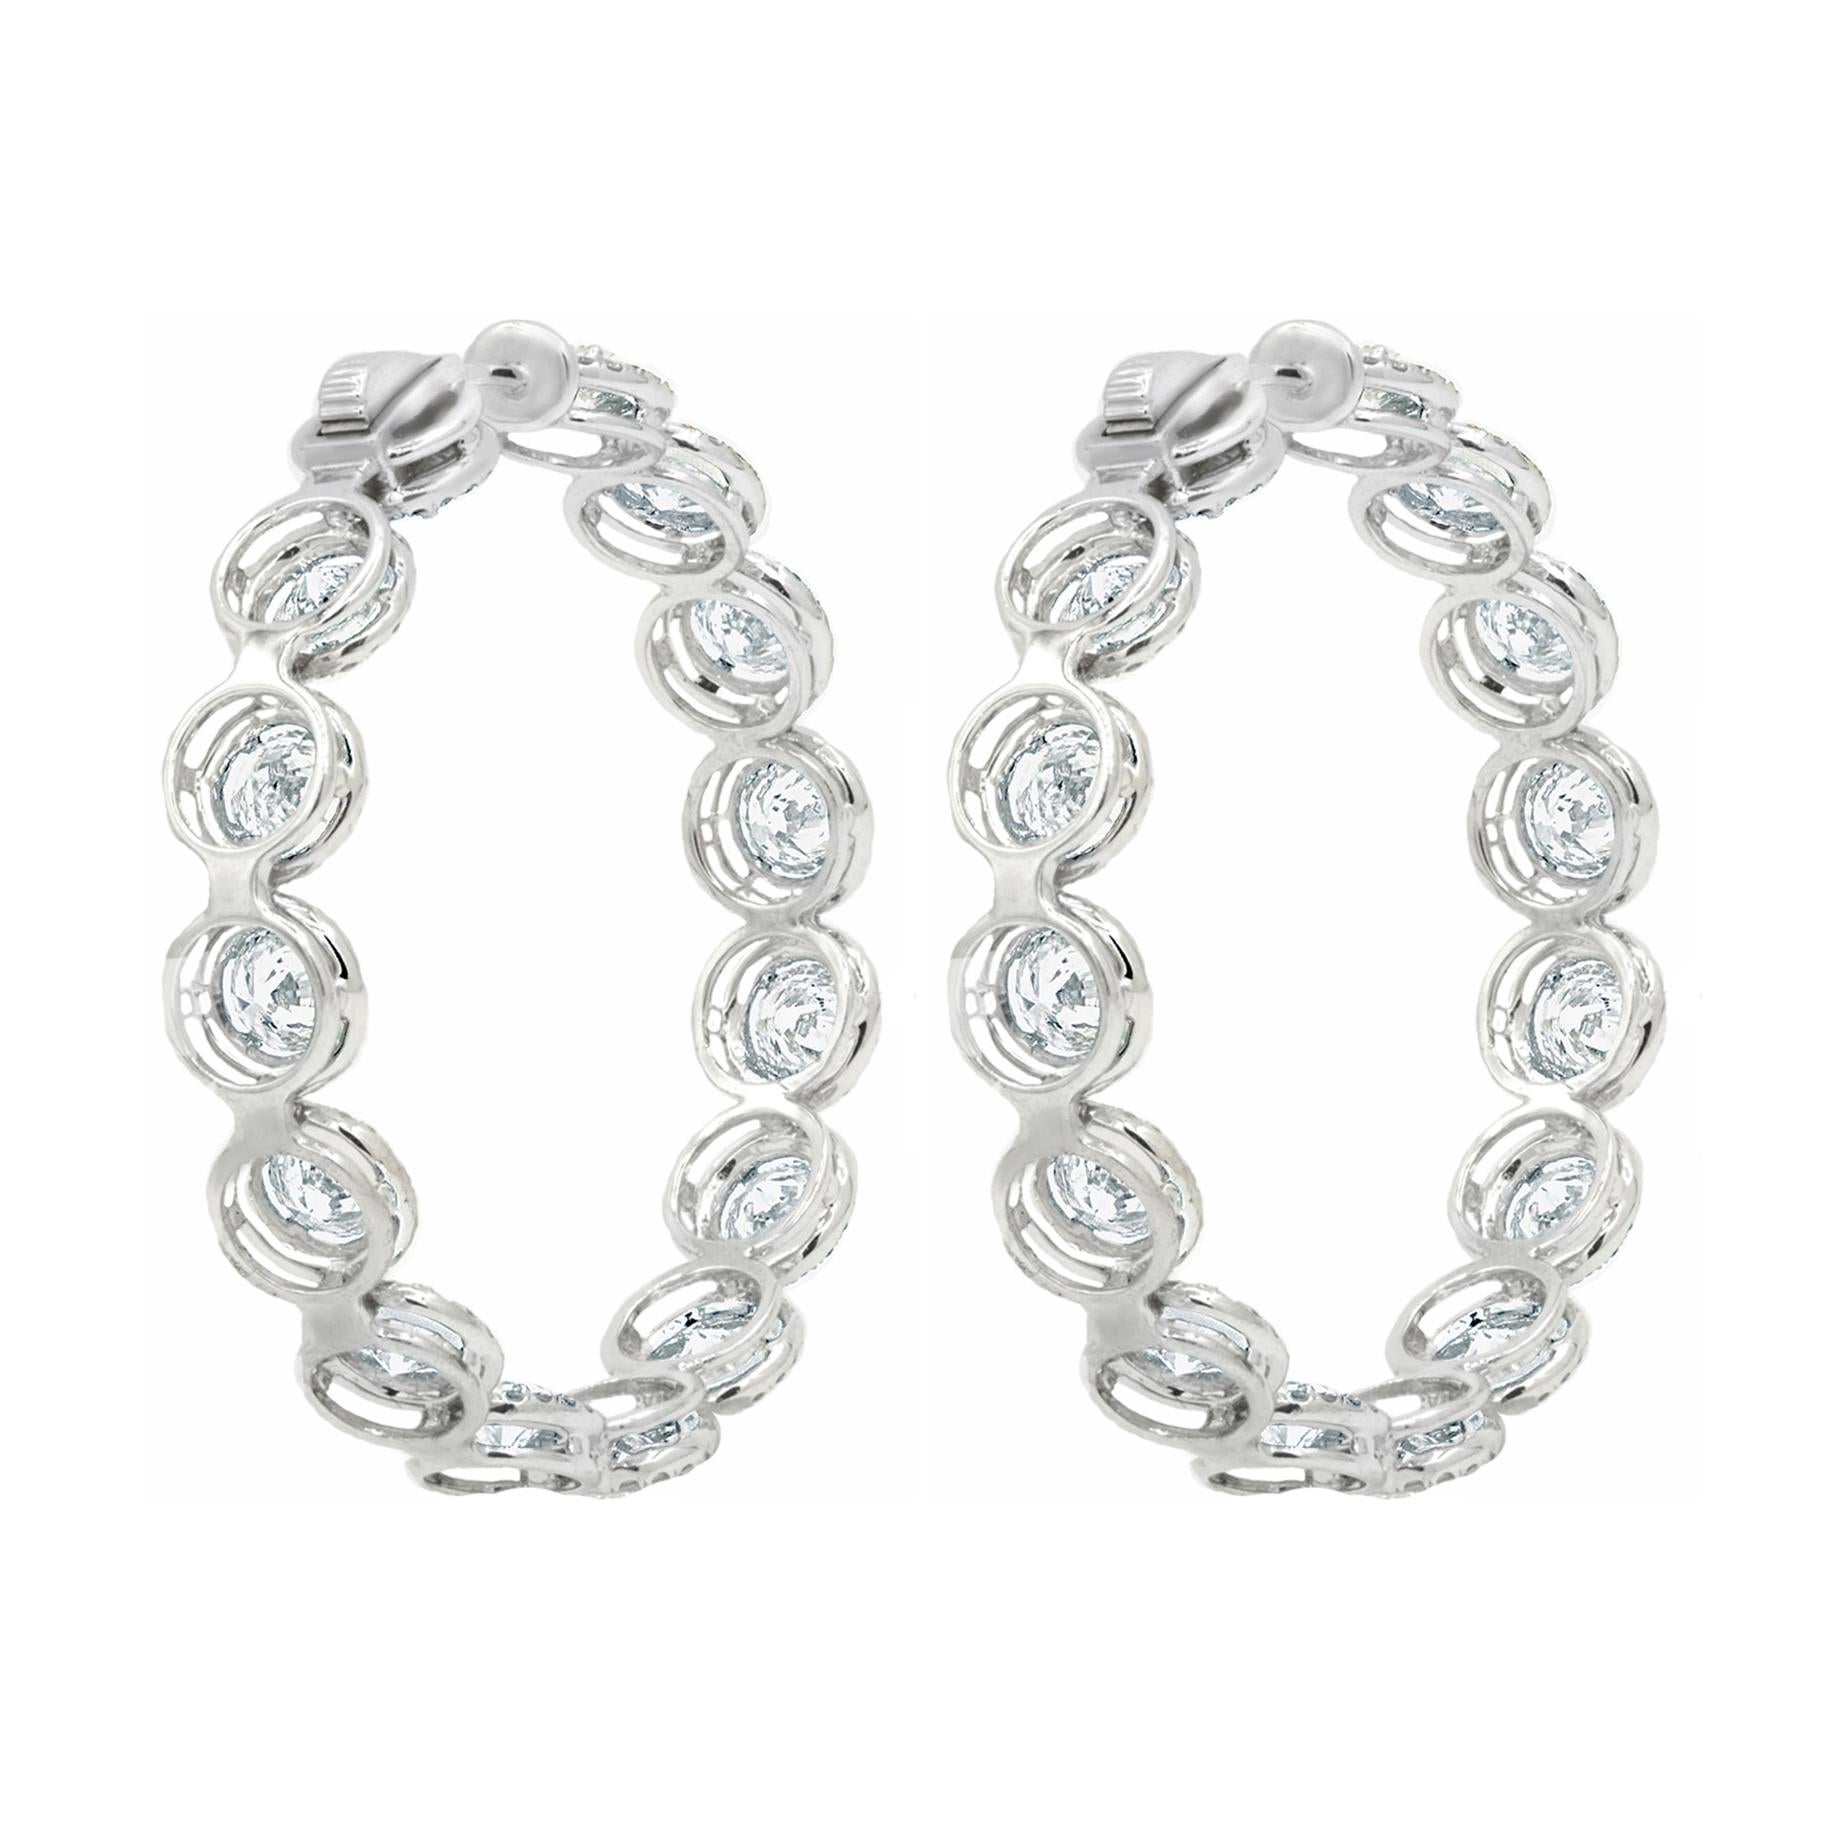 18KT gold Gorgeous diamond hoop earrings, features 12.20 Carats of diamonds, each stone is approximately 0.40 carats.